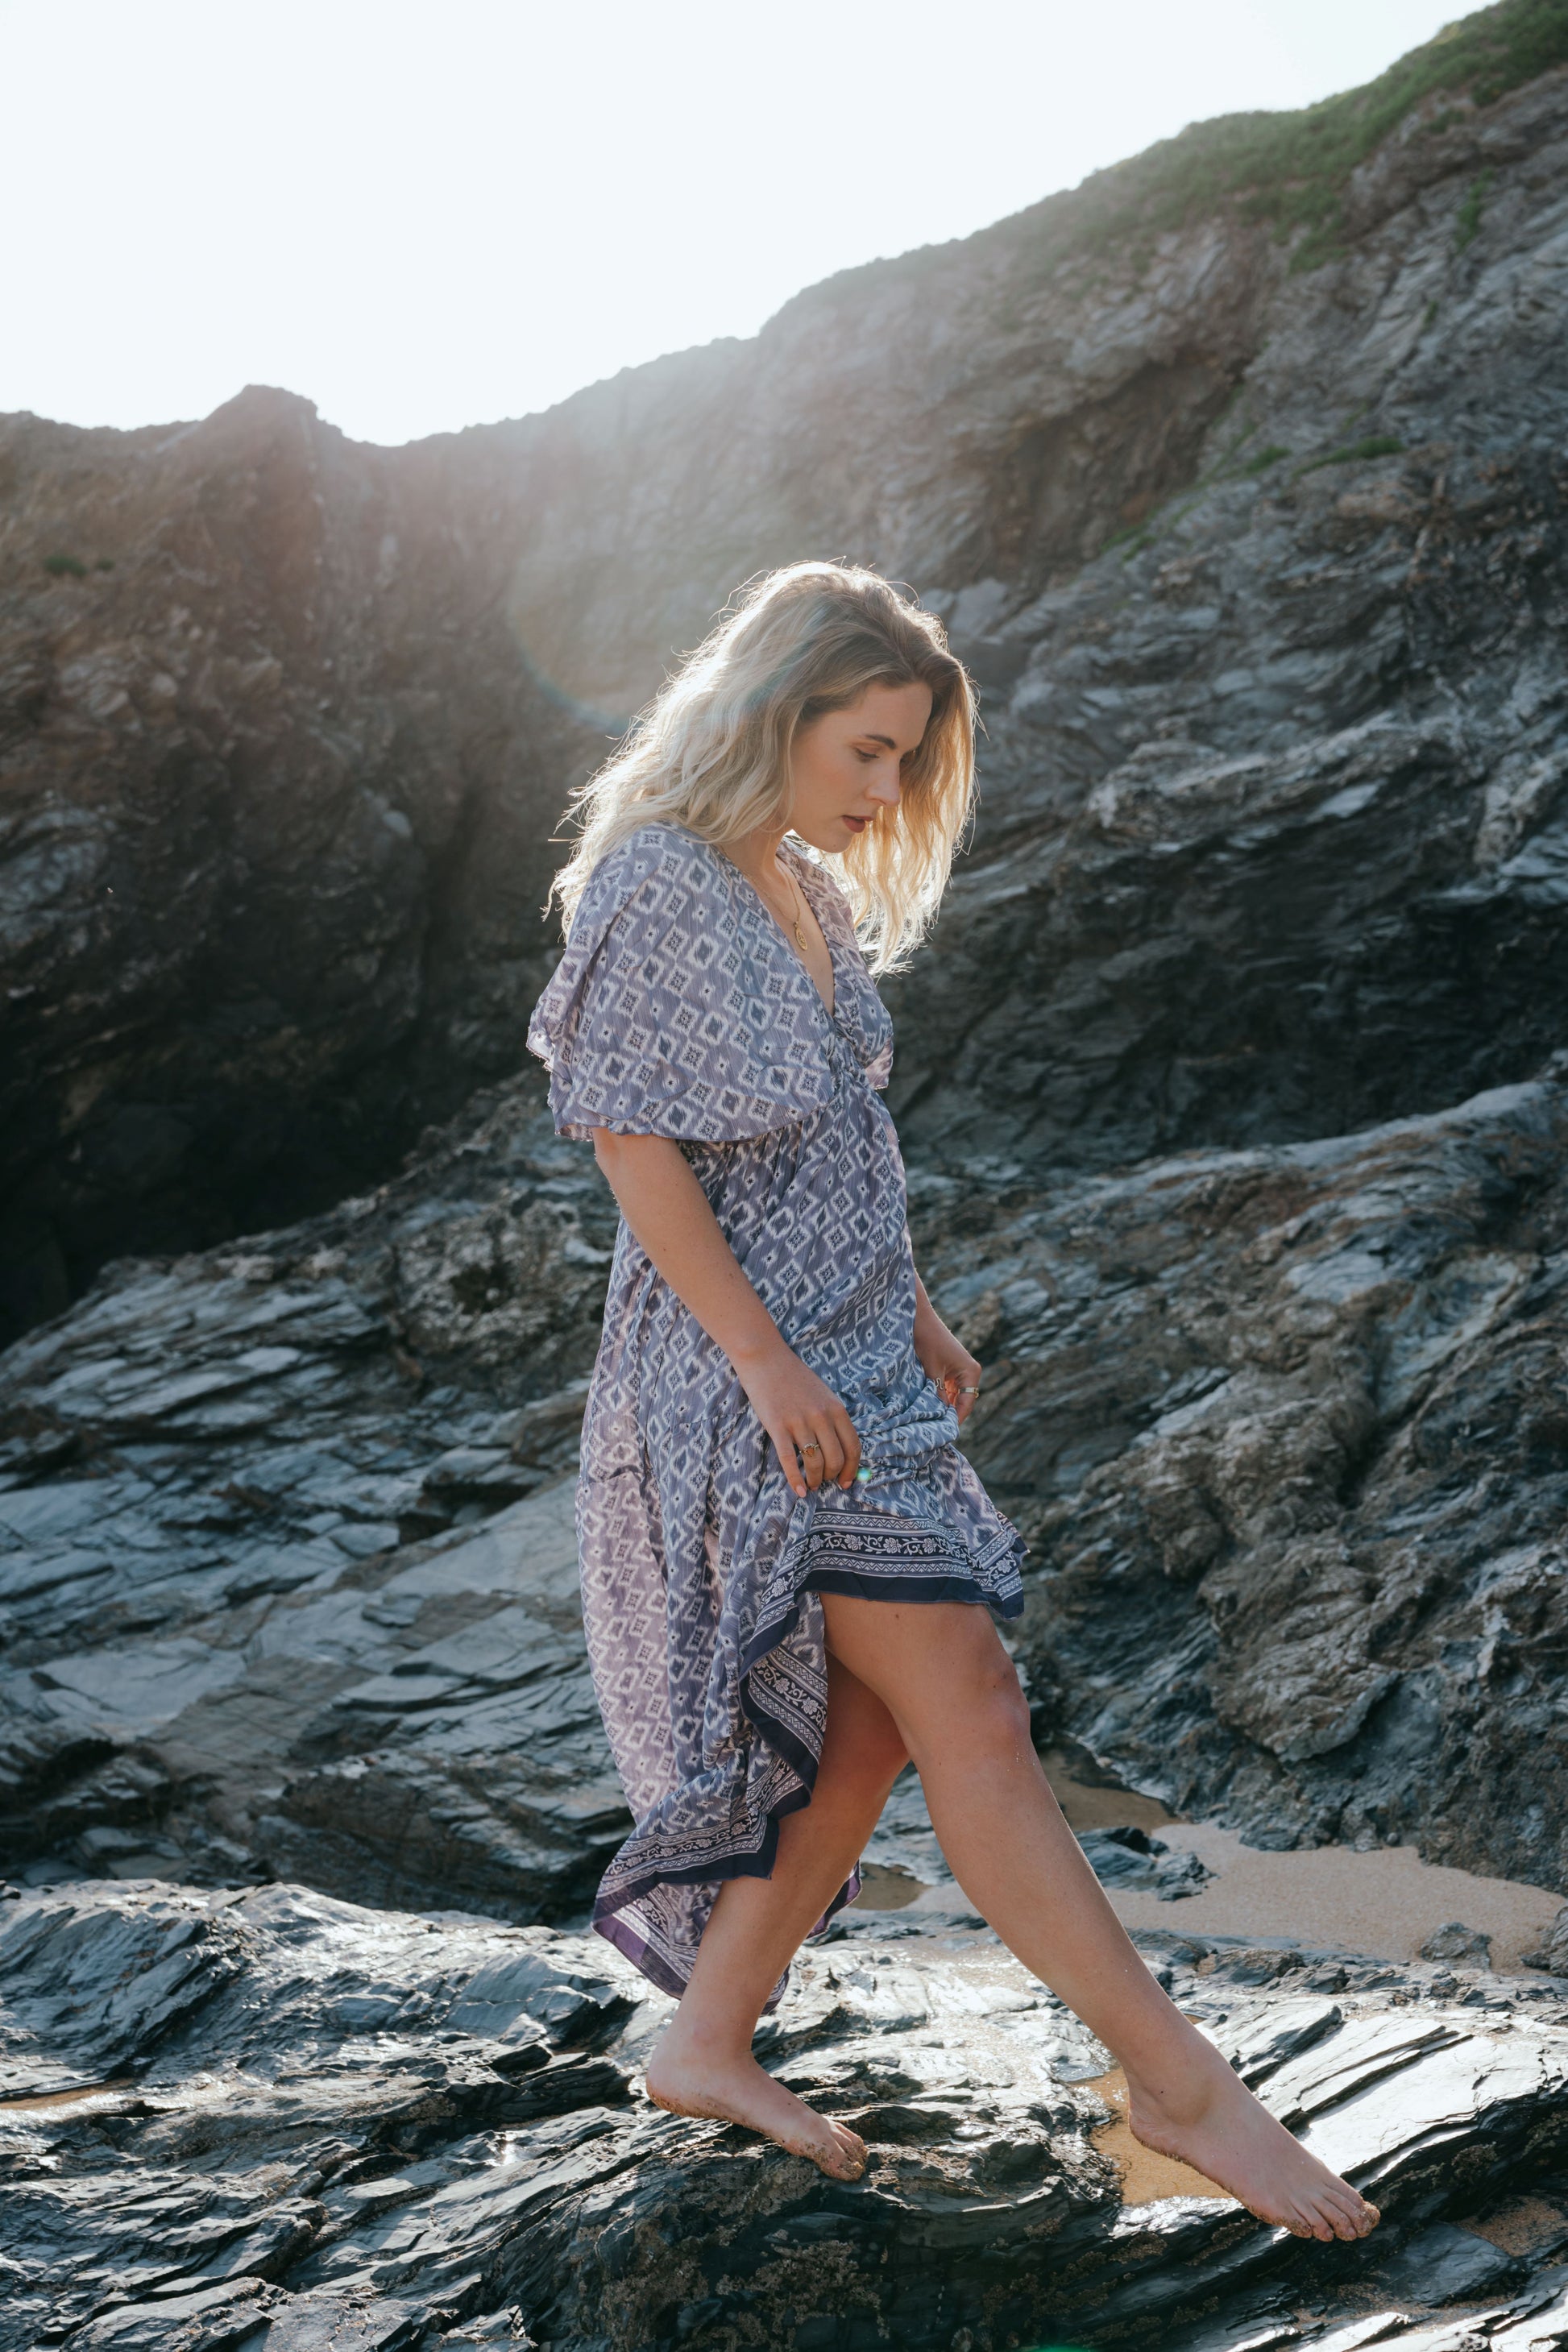 Shop the Etta dress from Anetos London's collection of effortlessly beautiful dresses.